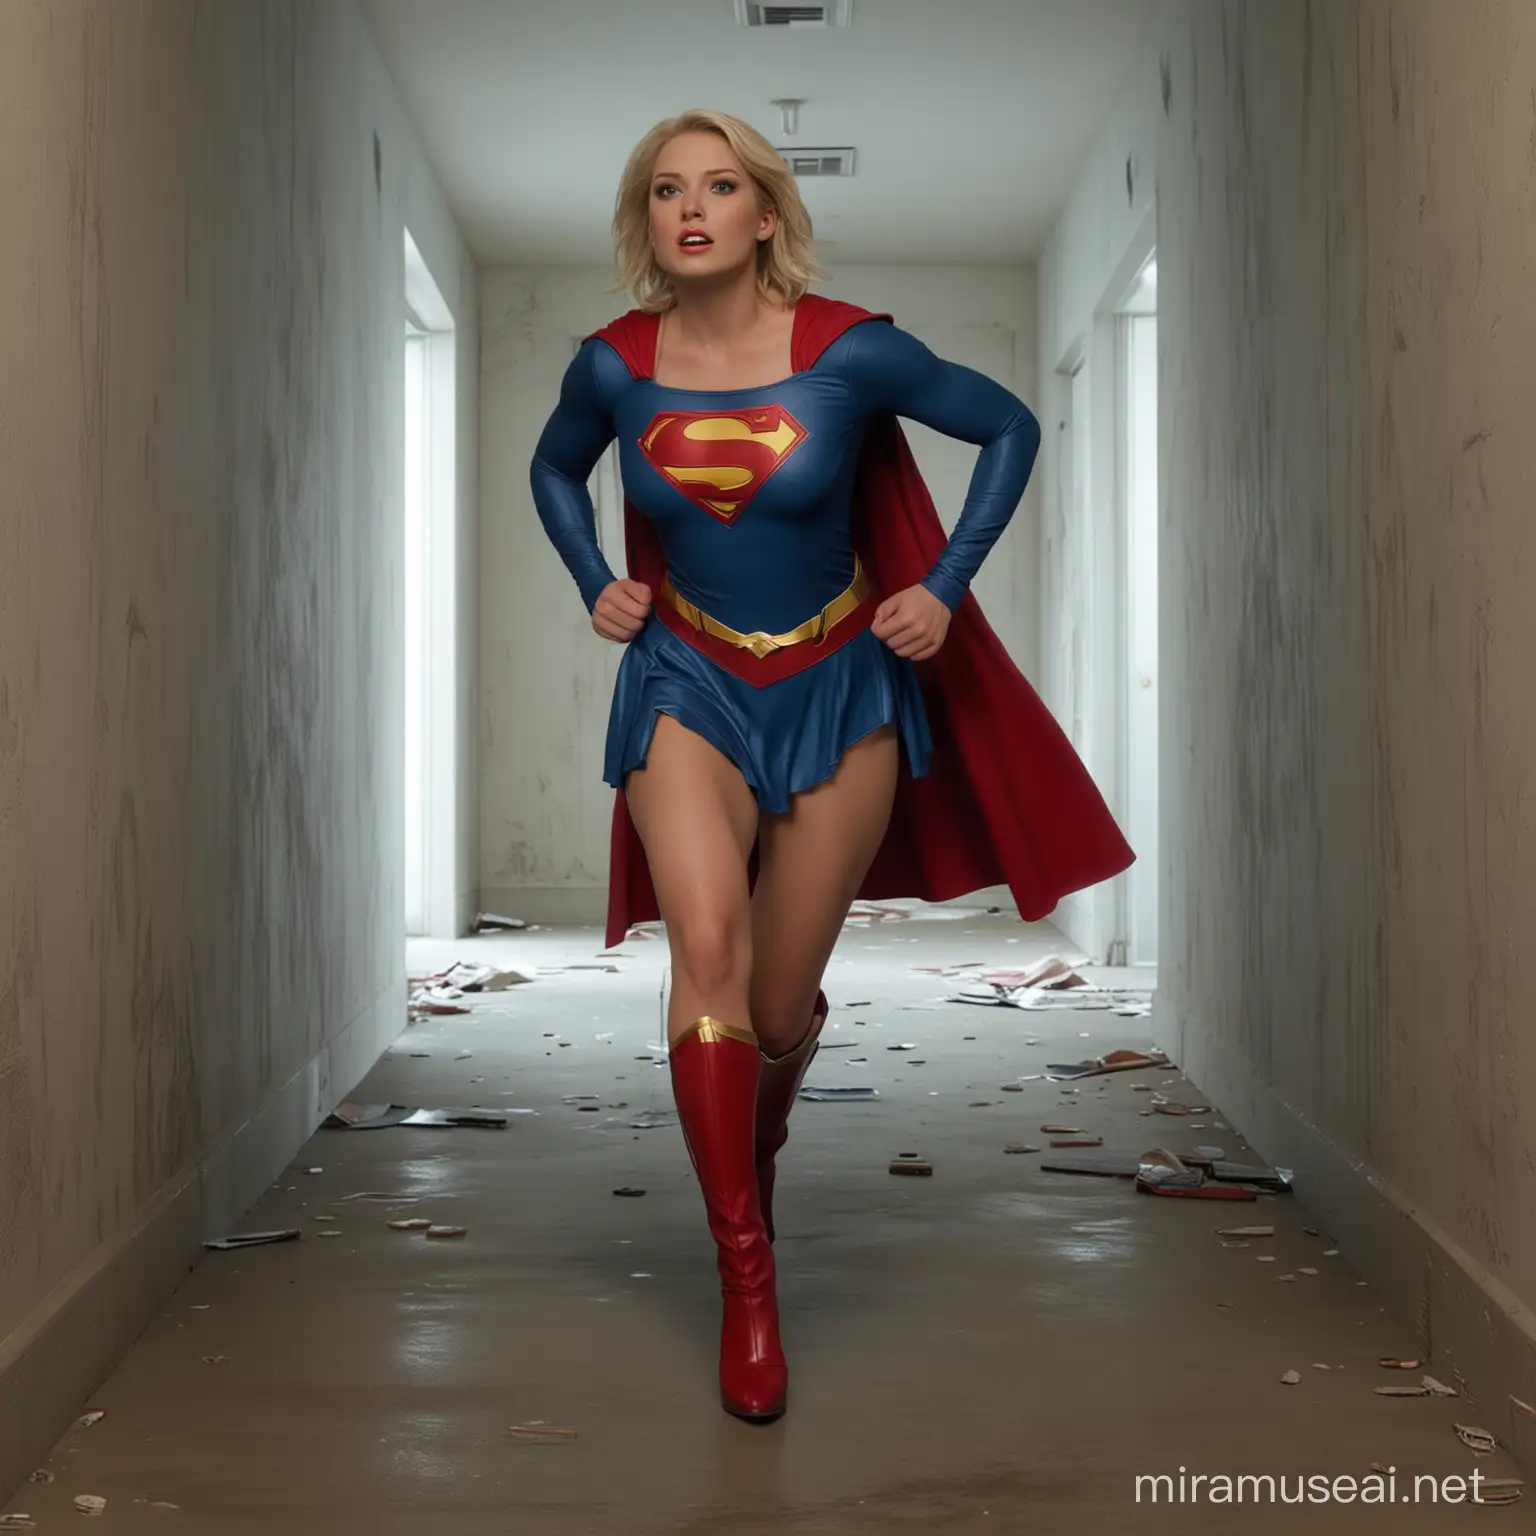 Androgynous Supergirl Trapped in Room with YellowToed Boots Sliding Down